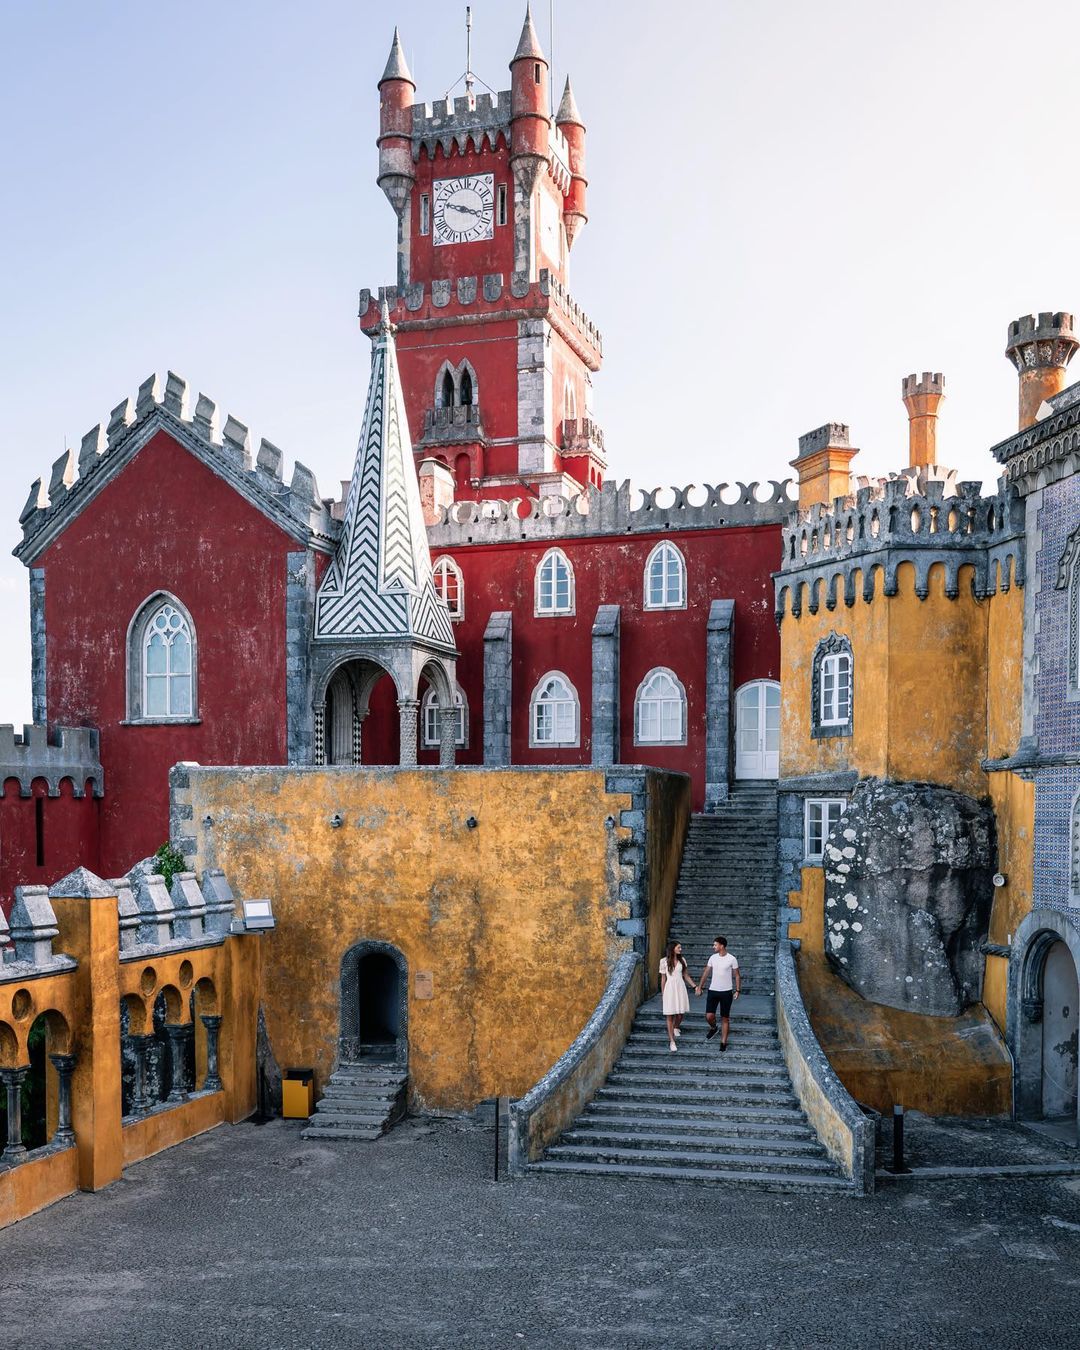 Sintra National Palace - 10 Must-See Attractions in Sintra